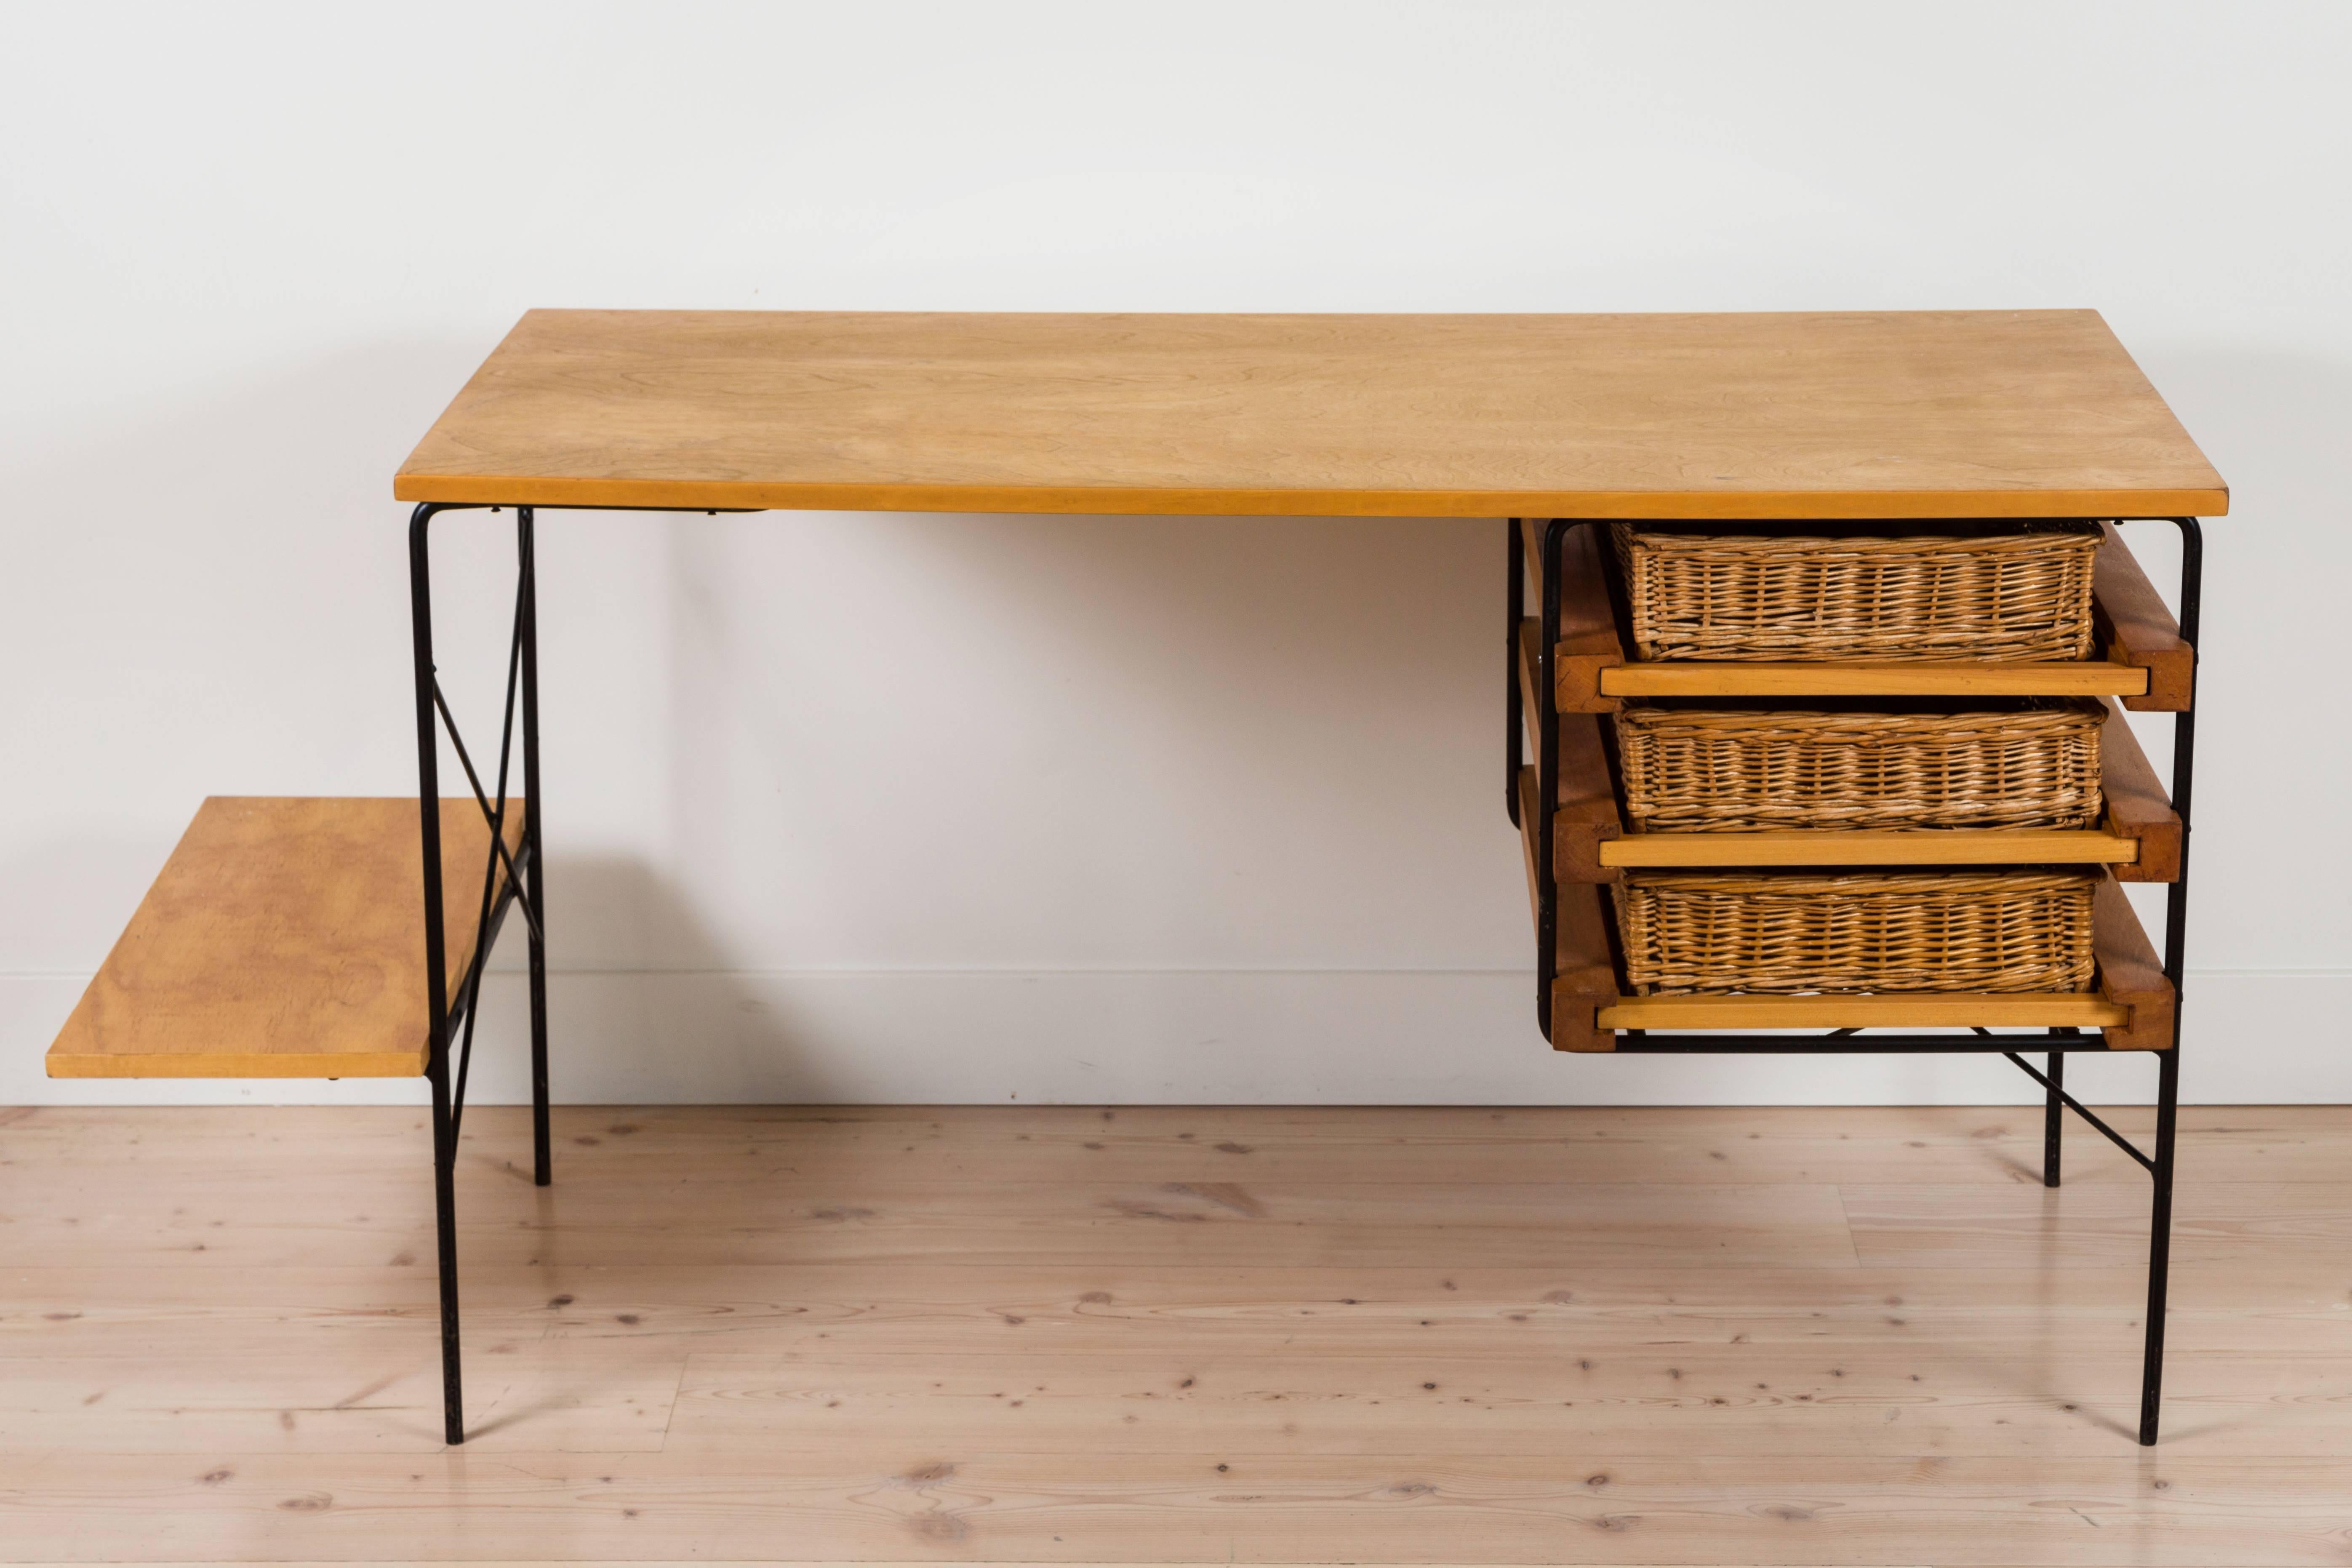 Mid-20th Century Iron and Maple Desk by Dorothy Schindele for Modern Color CA